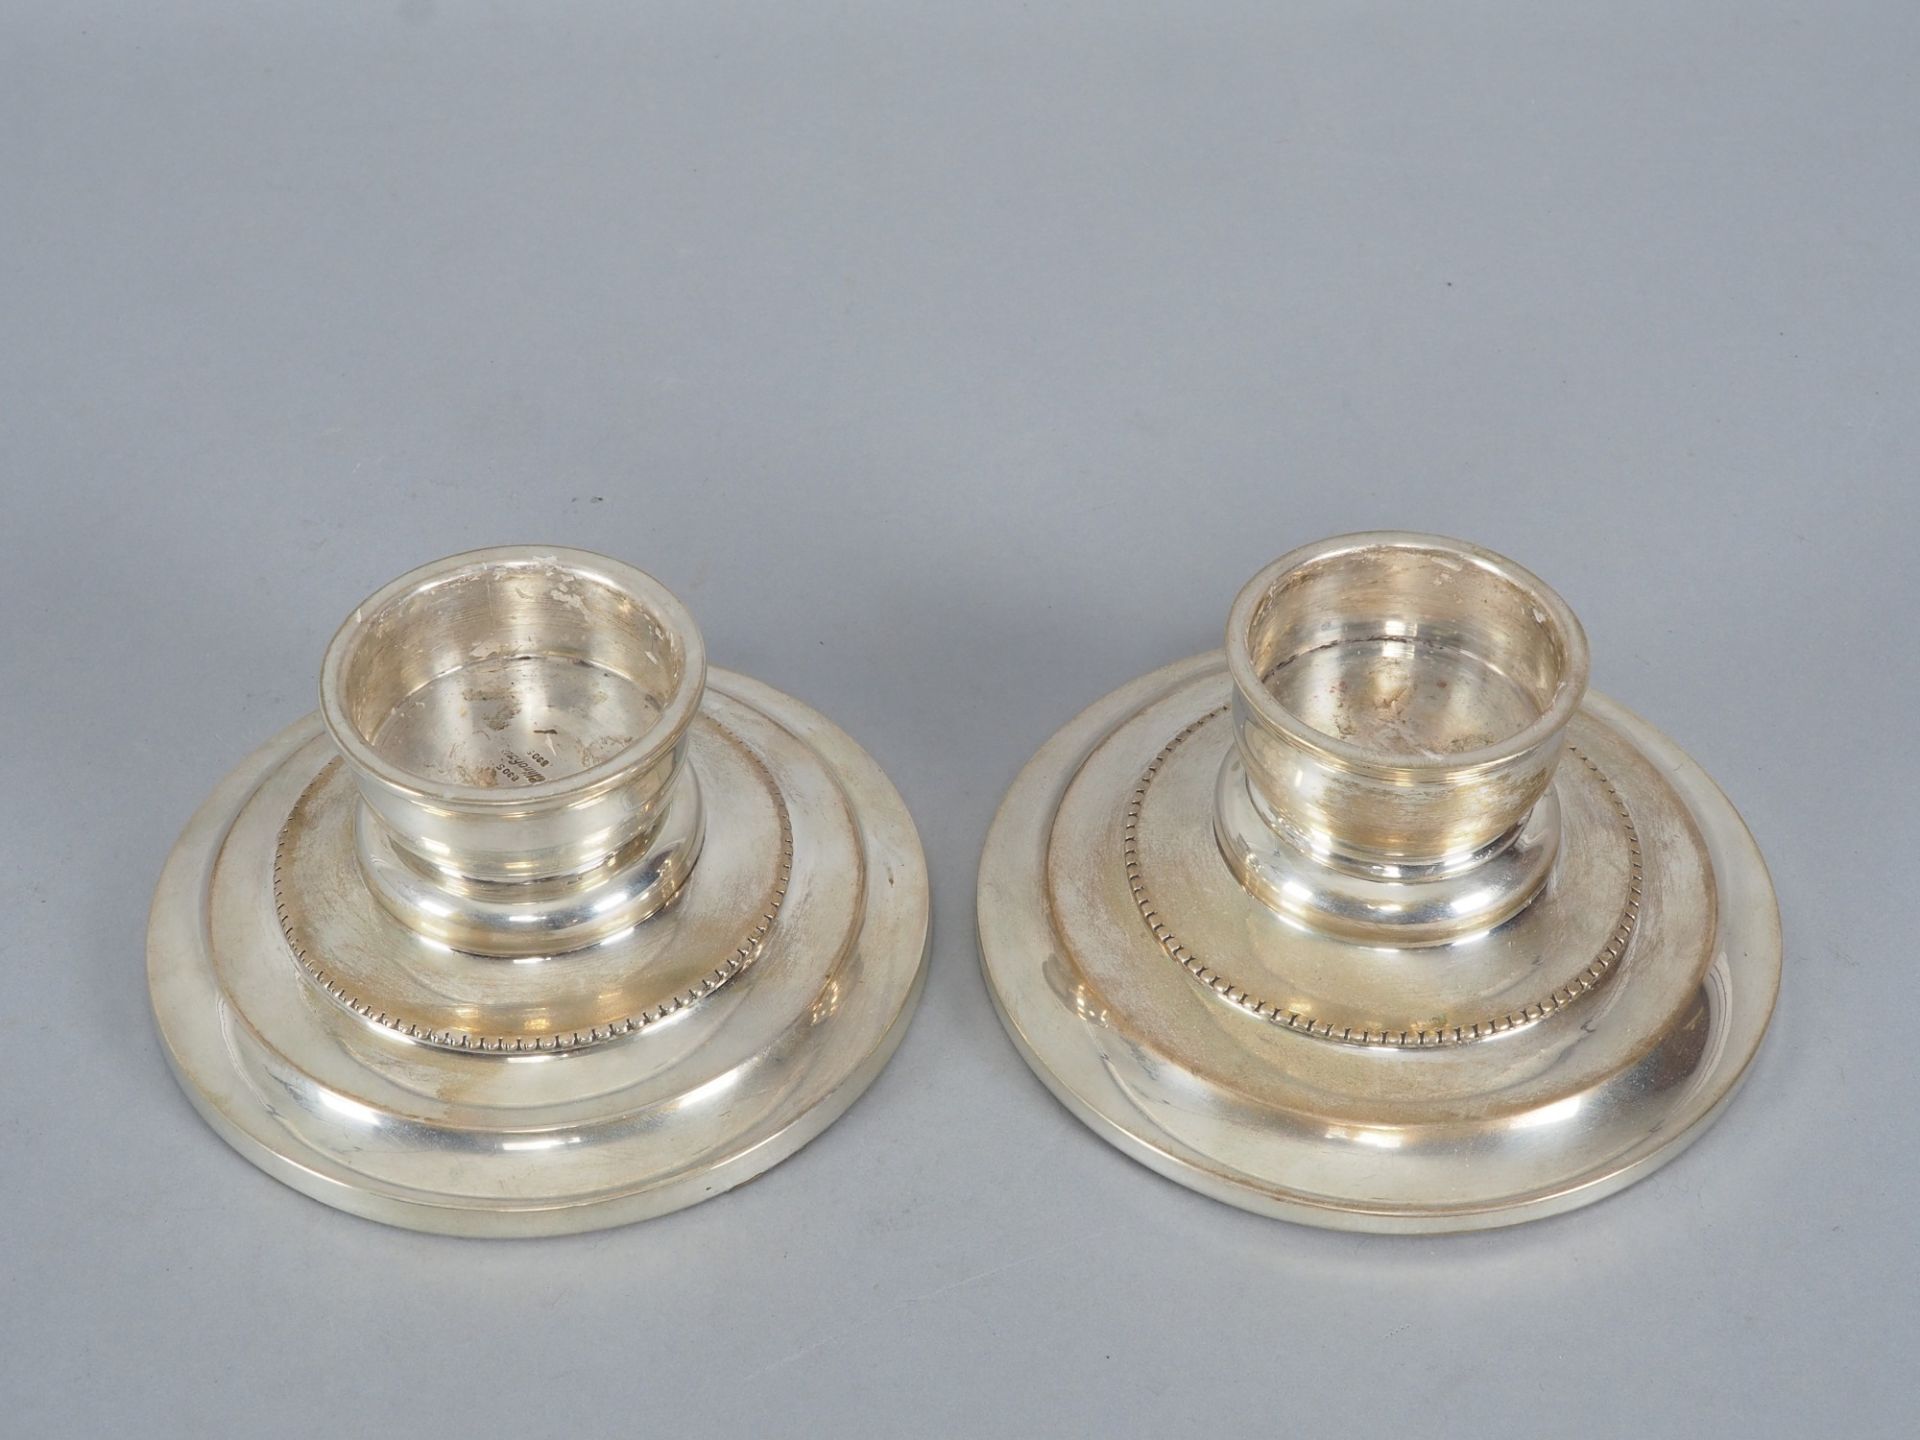 Pair of candlesticks, art deco, silver. - Image 2 of 3